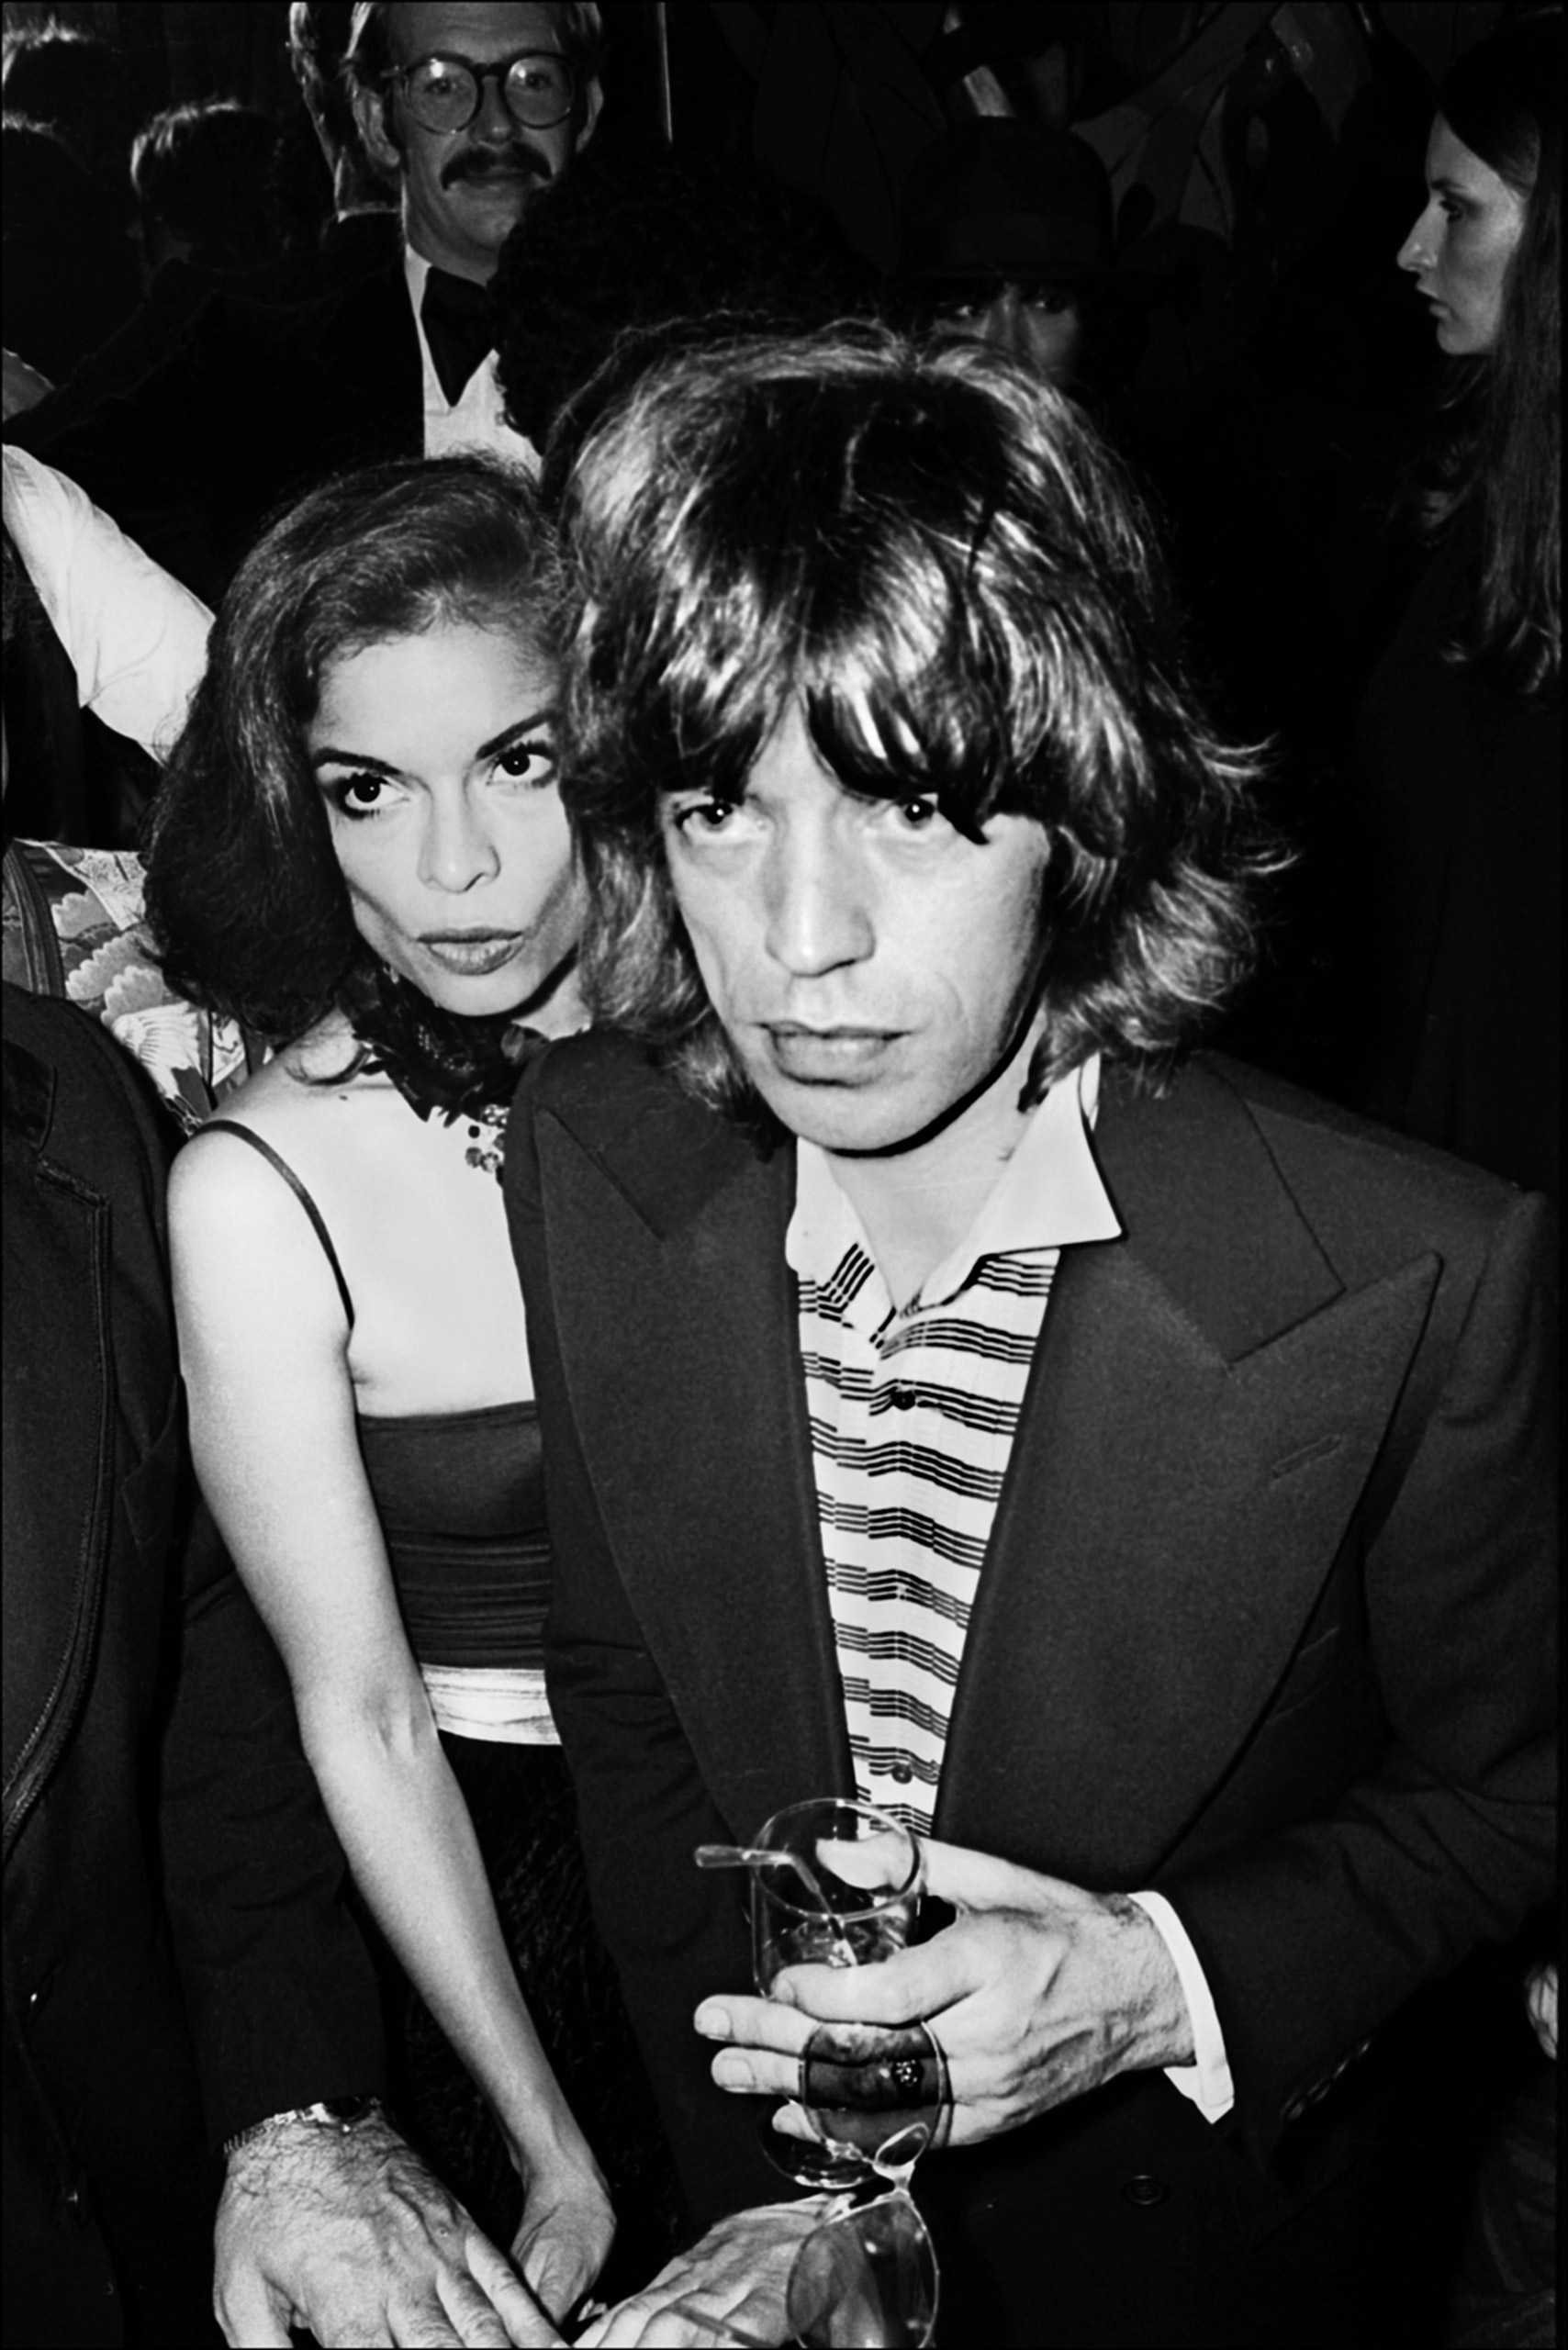 Mick Jagger and his wife Bianca arrive at the Andy Warhol-hosted re-opening party of the Copacabana nightclub, New York, N.Y., Oct. 13, 1976.